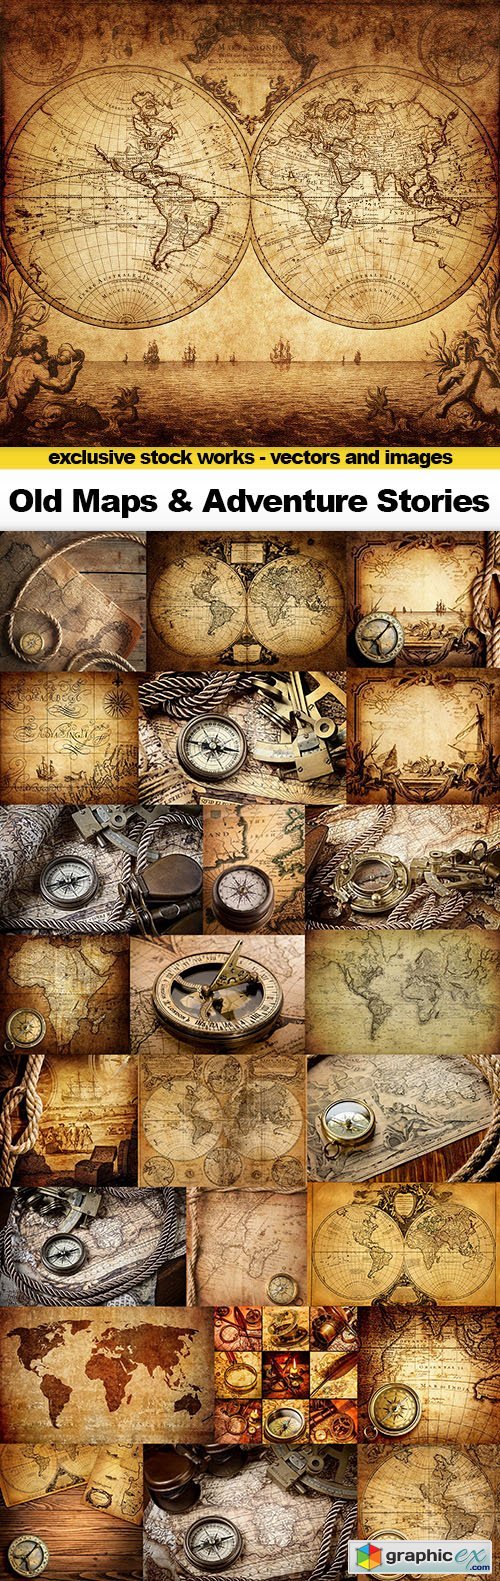 Old Maps, ompass, Rope on Canvas & Adventure Stories Background, 25x UHQ JPEG